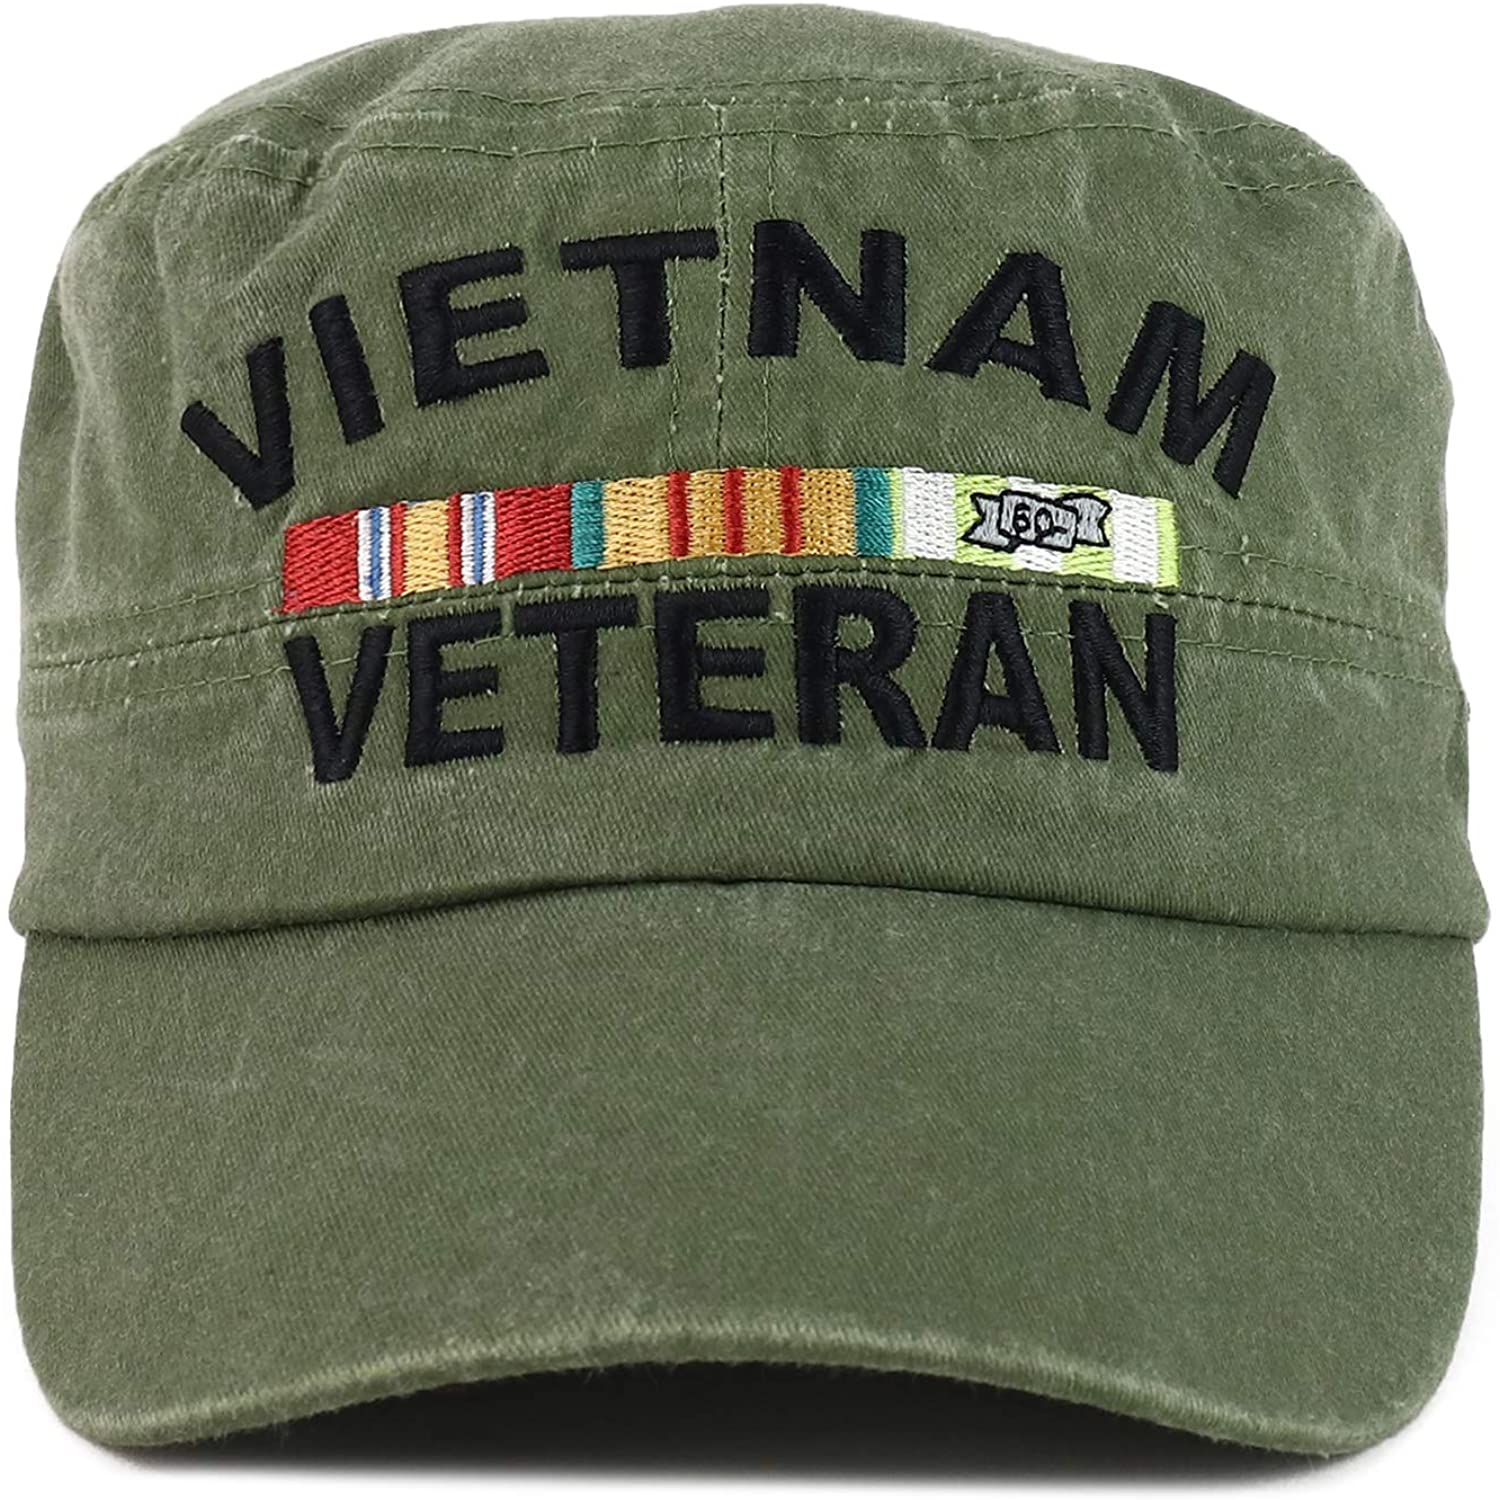 Armycrew Vietnam Veteran Ribbon Embroidered Washed Pigment Dyed Flat Top Cap - Olive